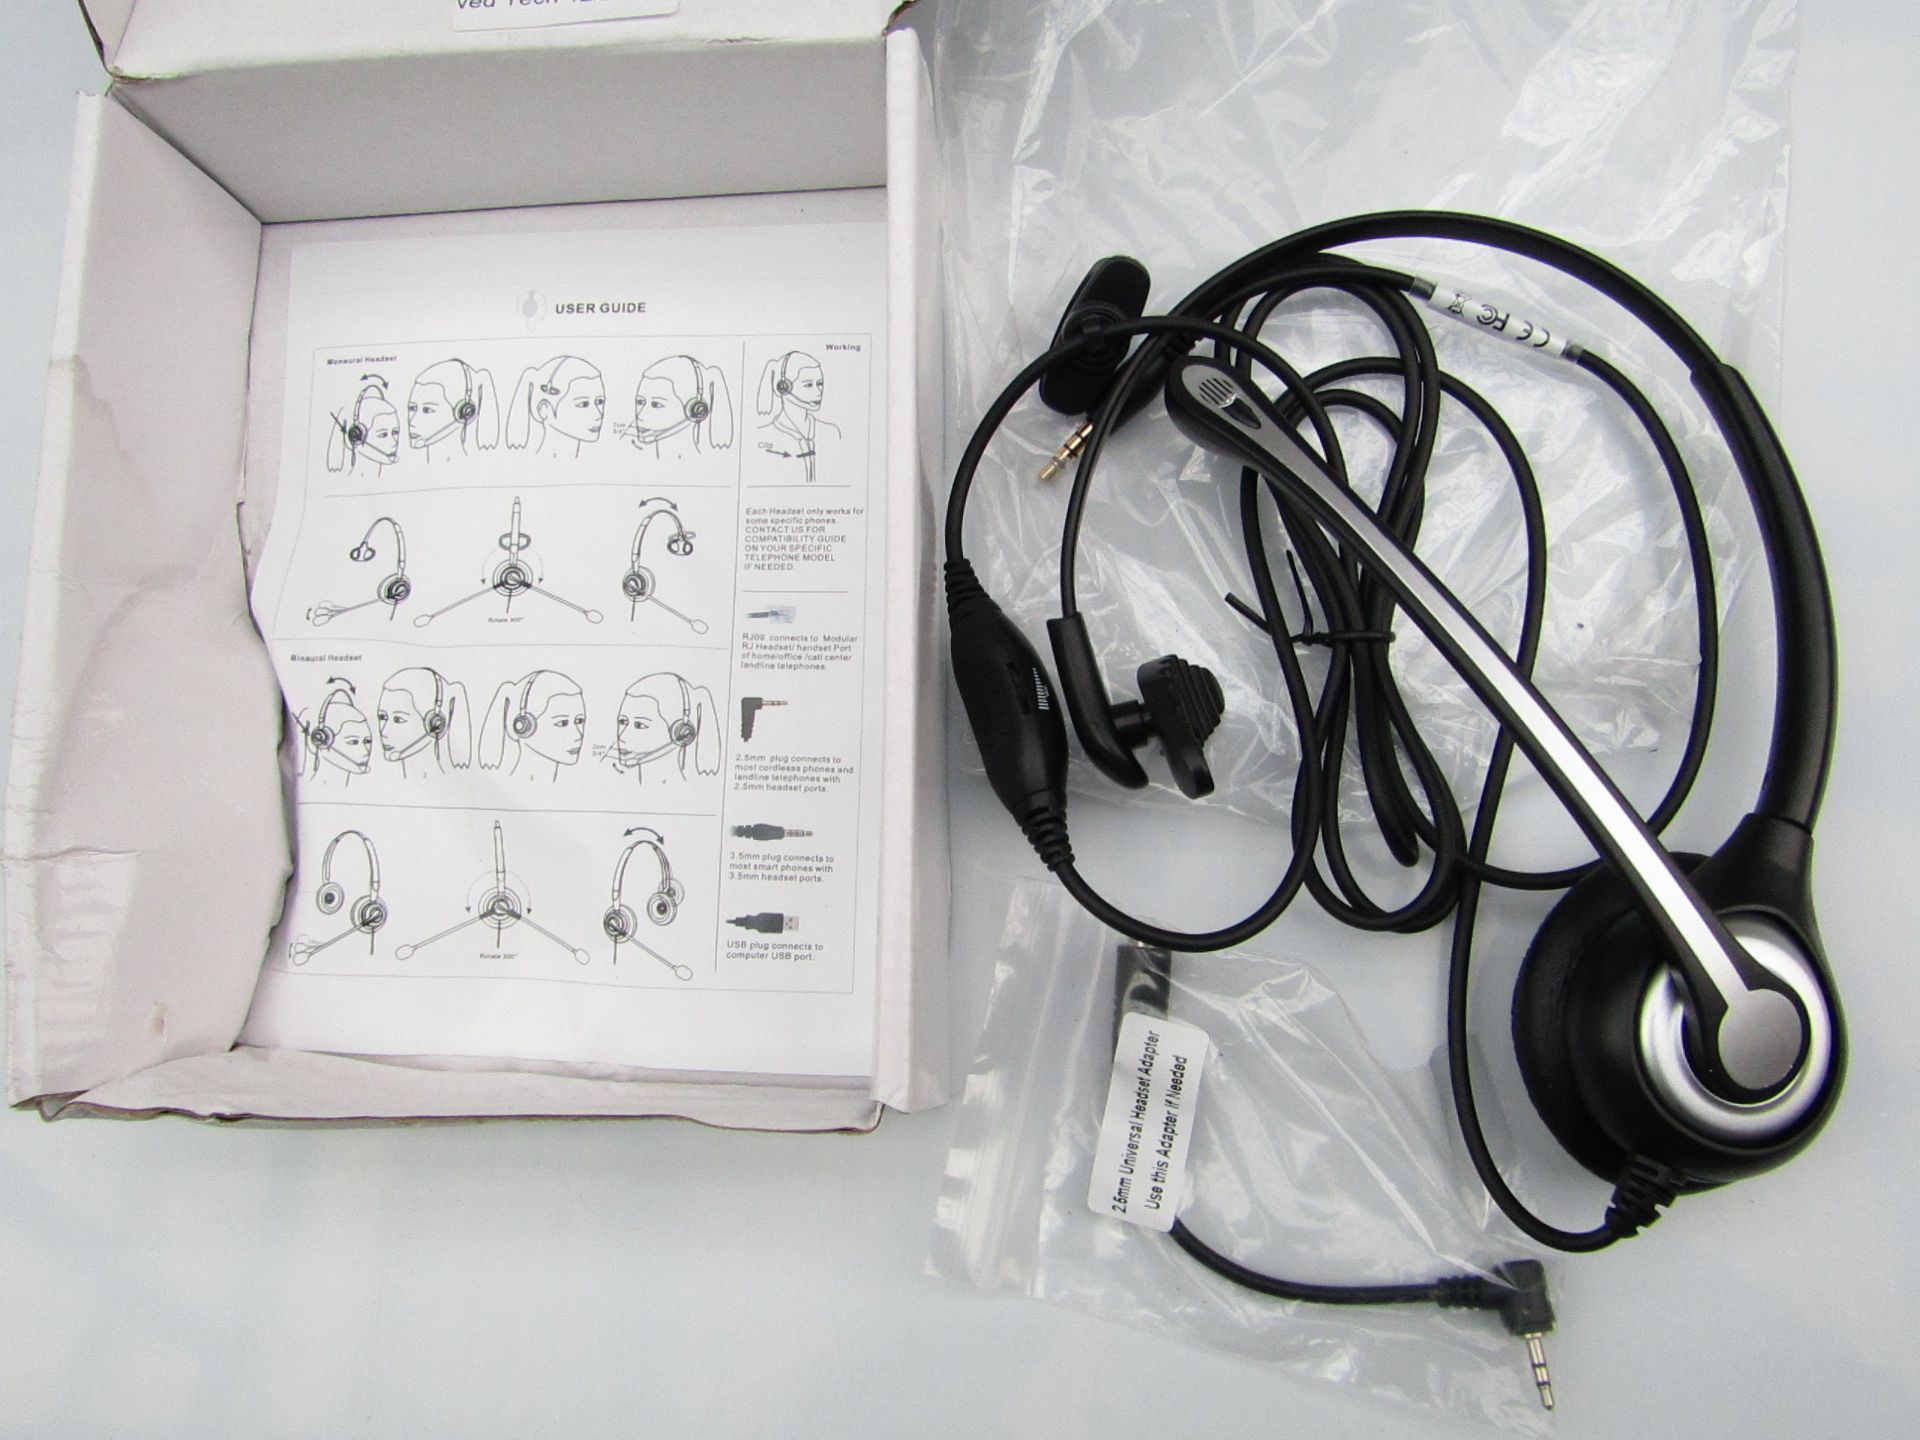 2.5mm Universal headphone adaptor, untested and boxed.